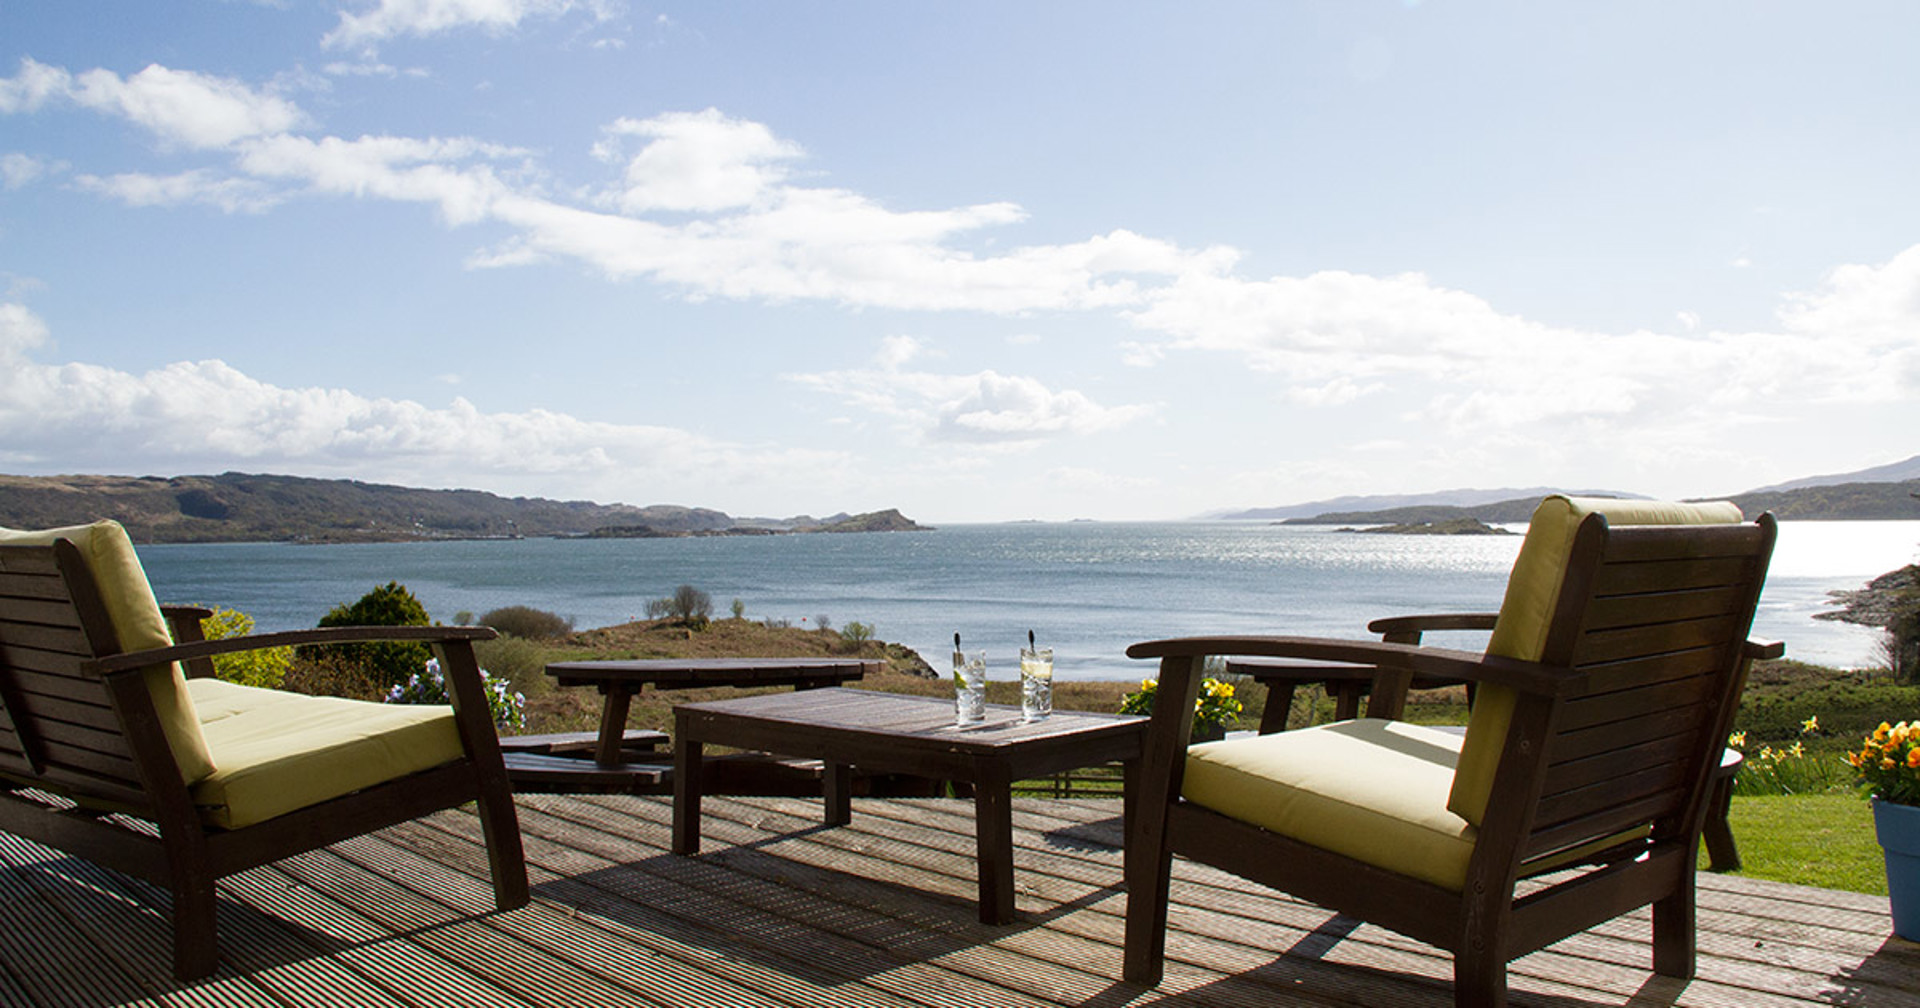 Background image - loch-melfort-hotel-oban-sea-view-relaxation.jpg